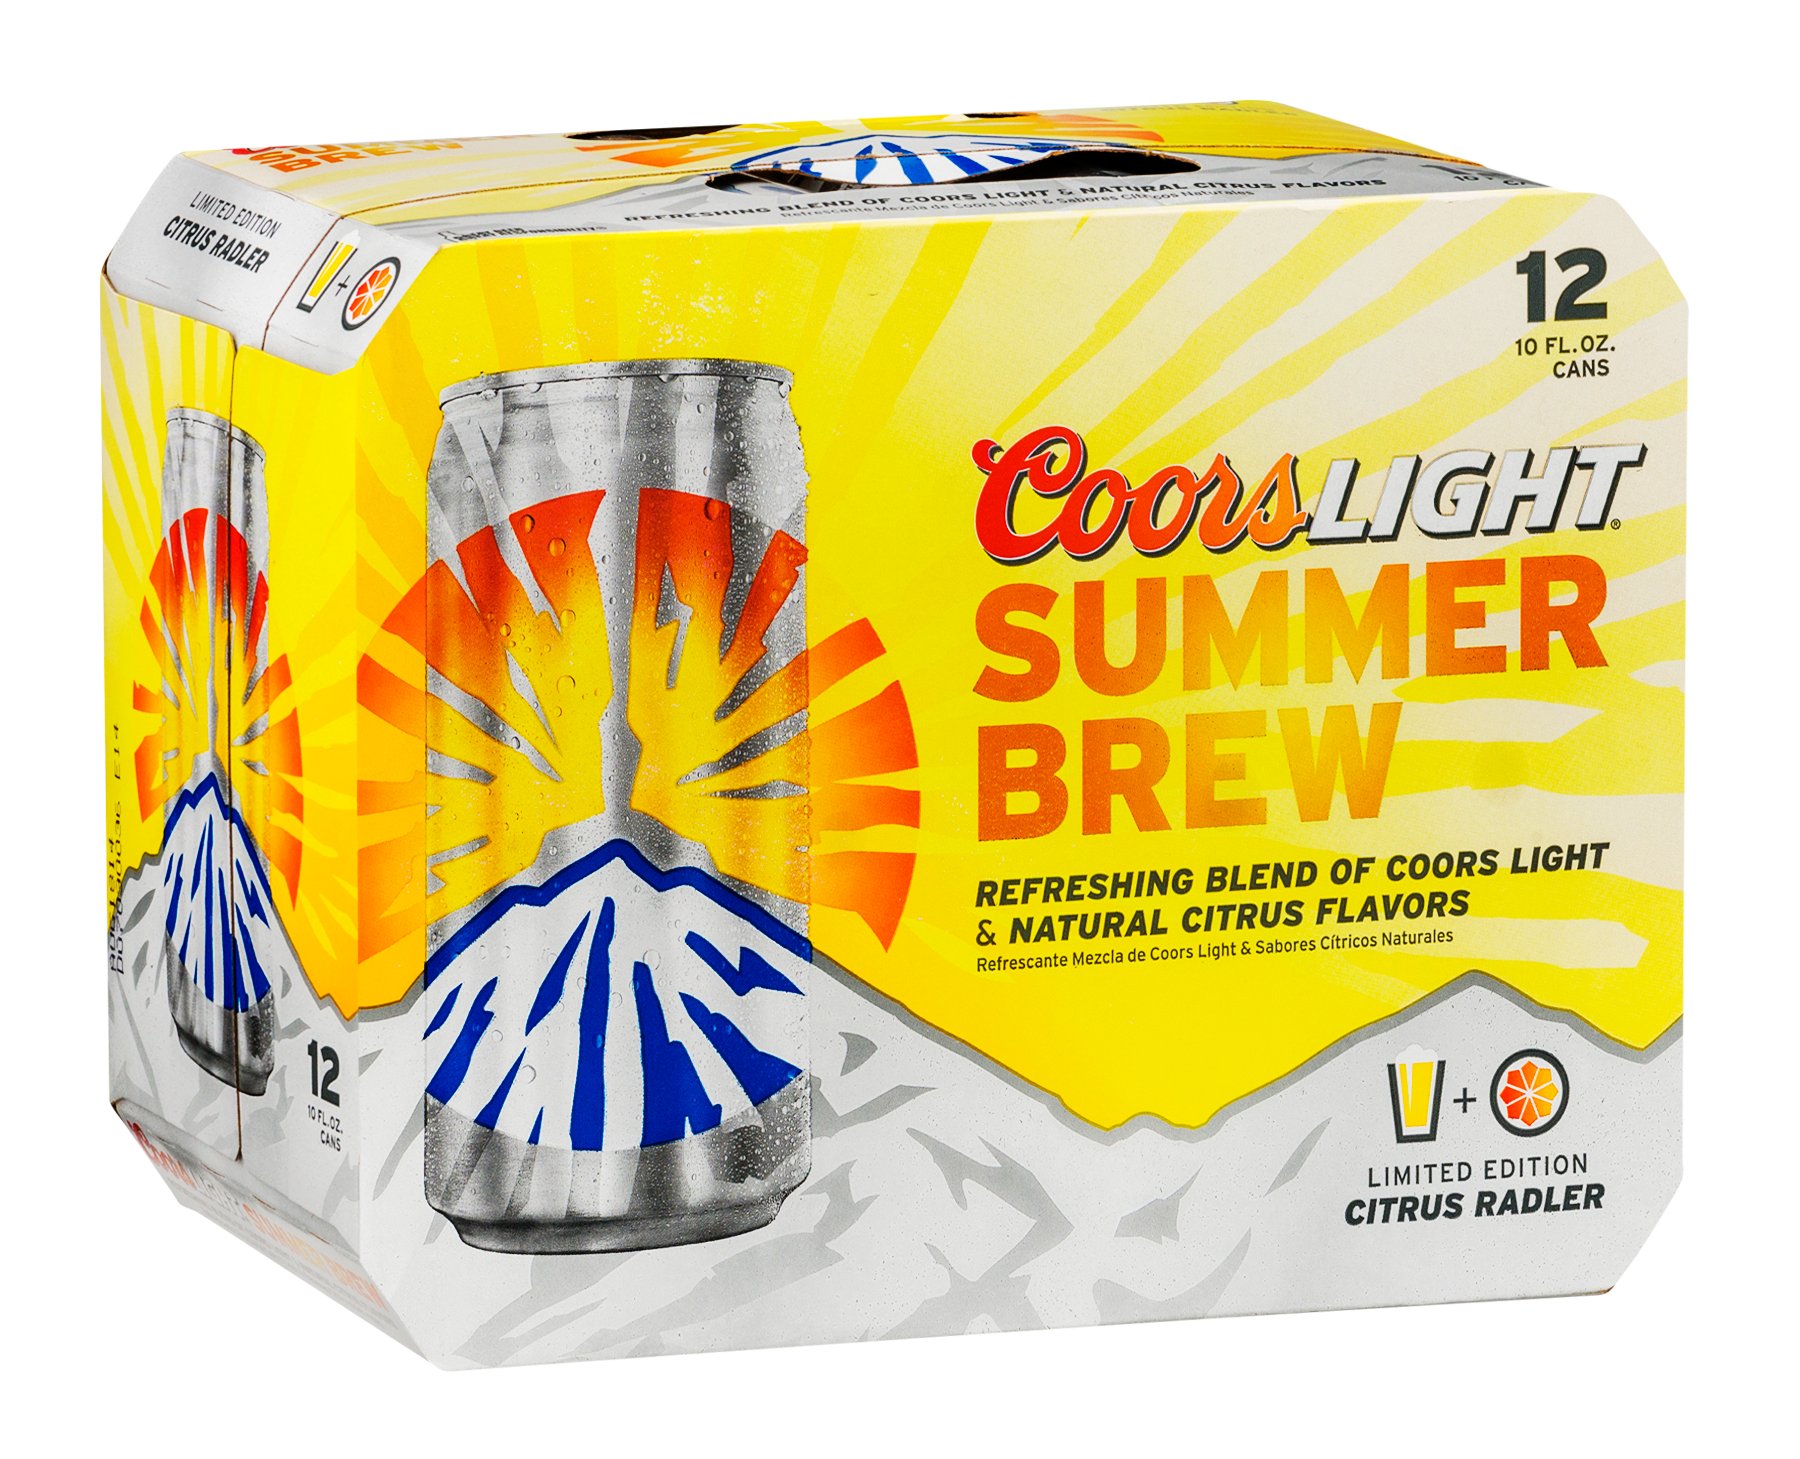 Coors Light Summer Brew 12 Pack Shop Beer at HEB